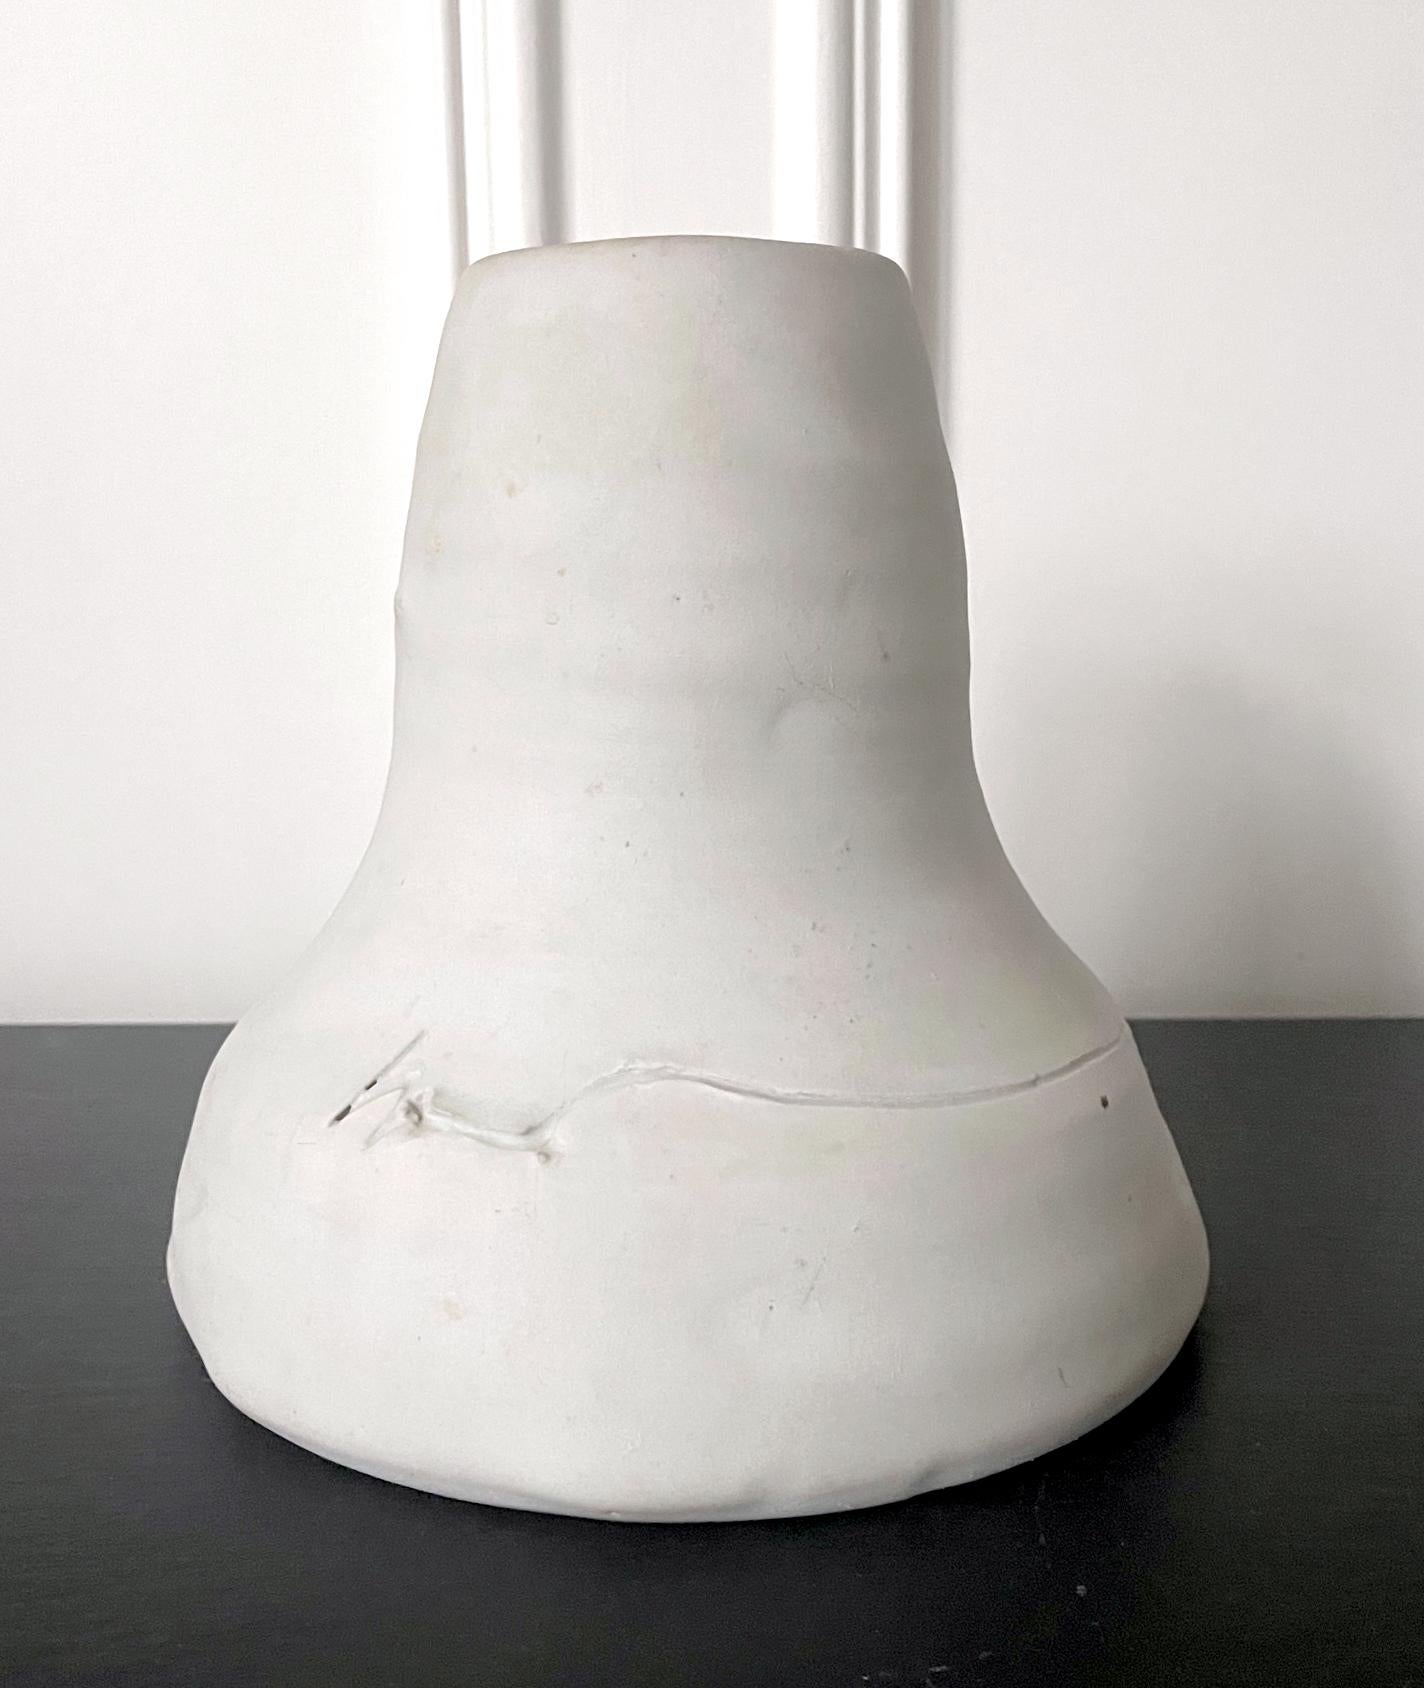 A white stoneware vase by American Ceramist Robert Chapman Turner (1913 - 2005). Made between 1970-80s, the group of white-colored vessels with such a funnel form were called either Beach or Shore, obviously inspired by the ocean. Hand sculptured in